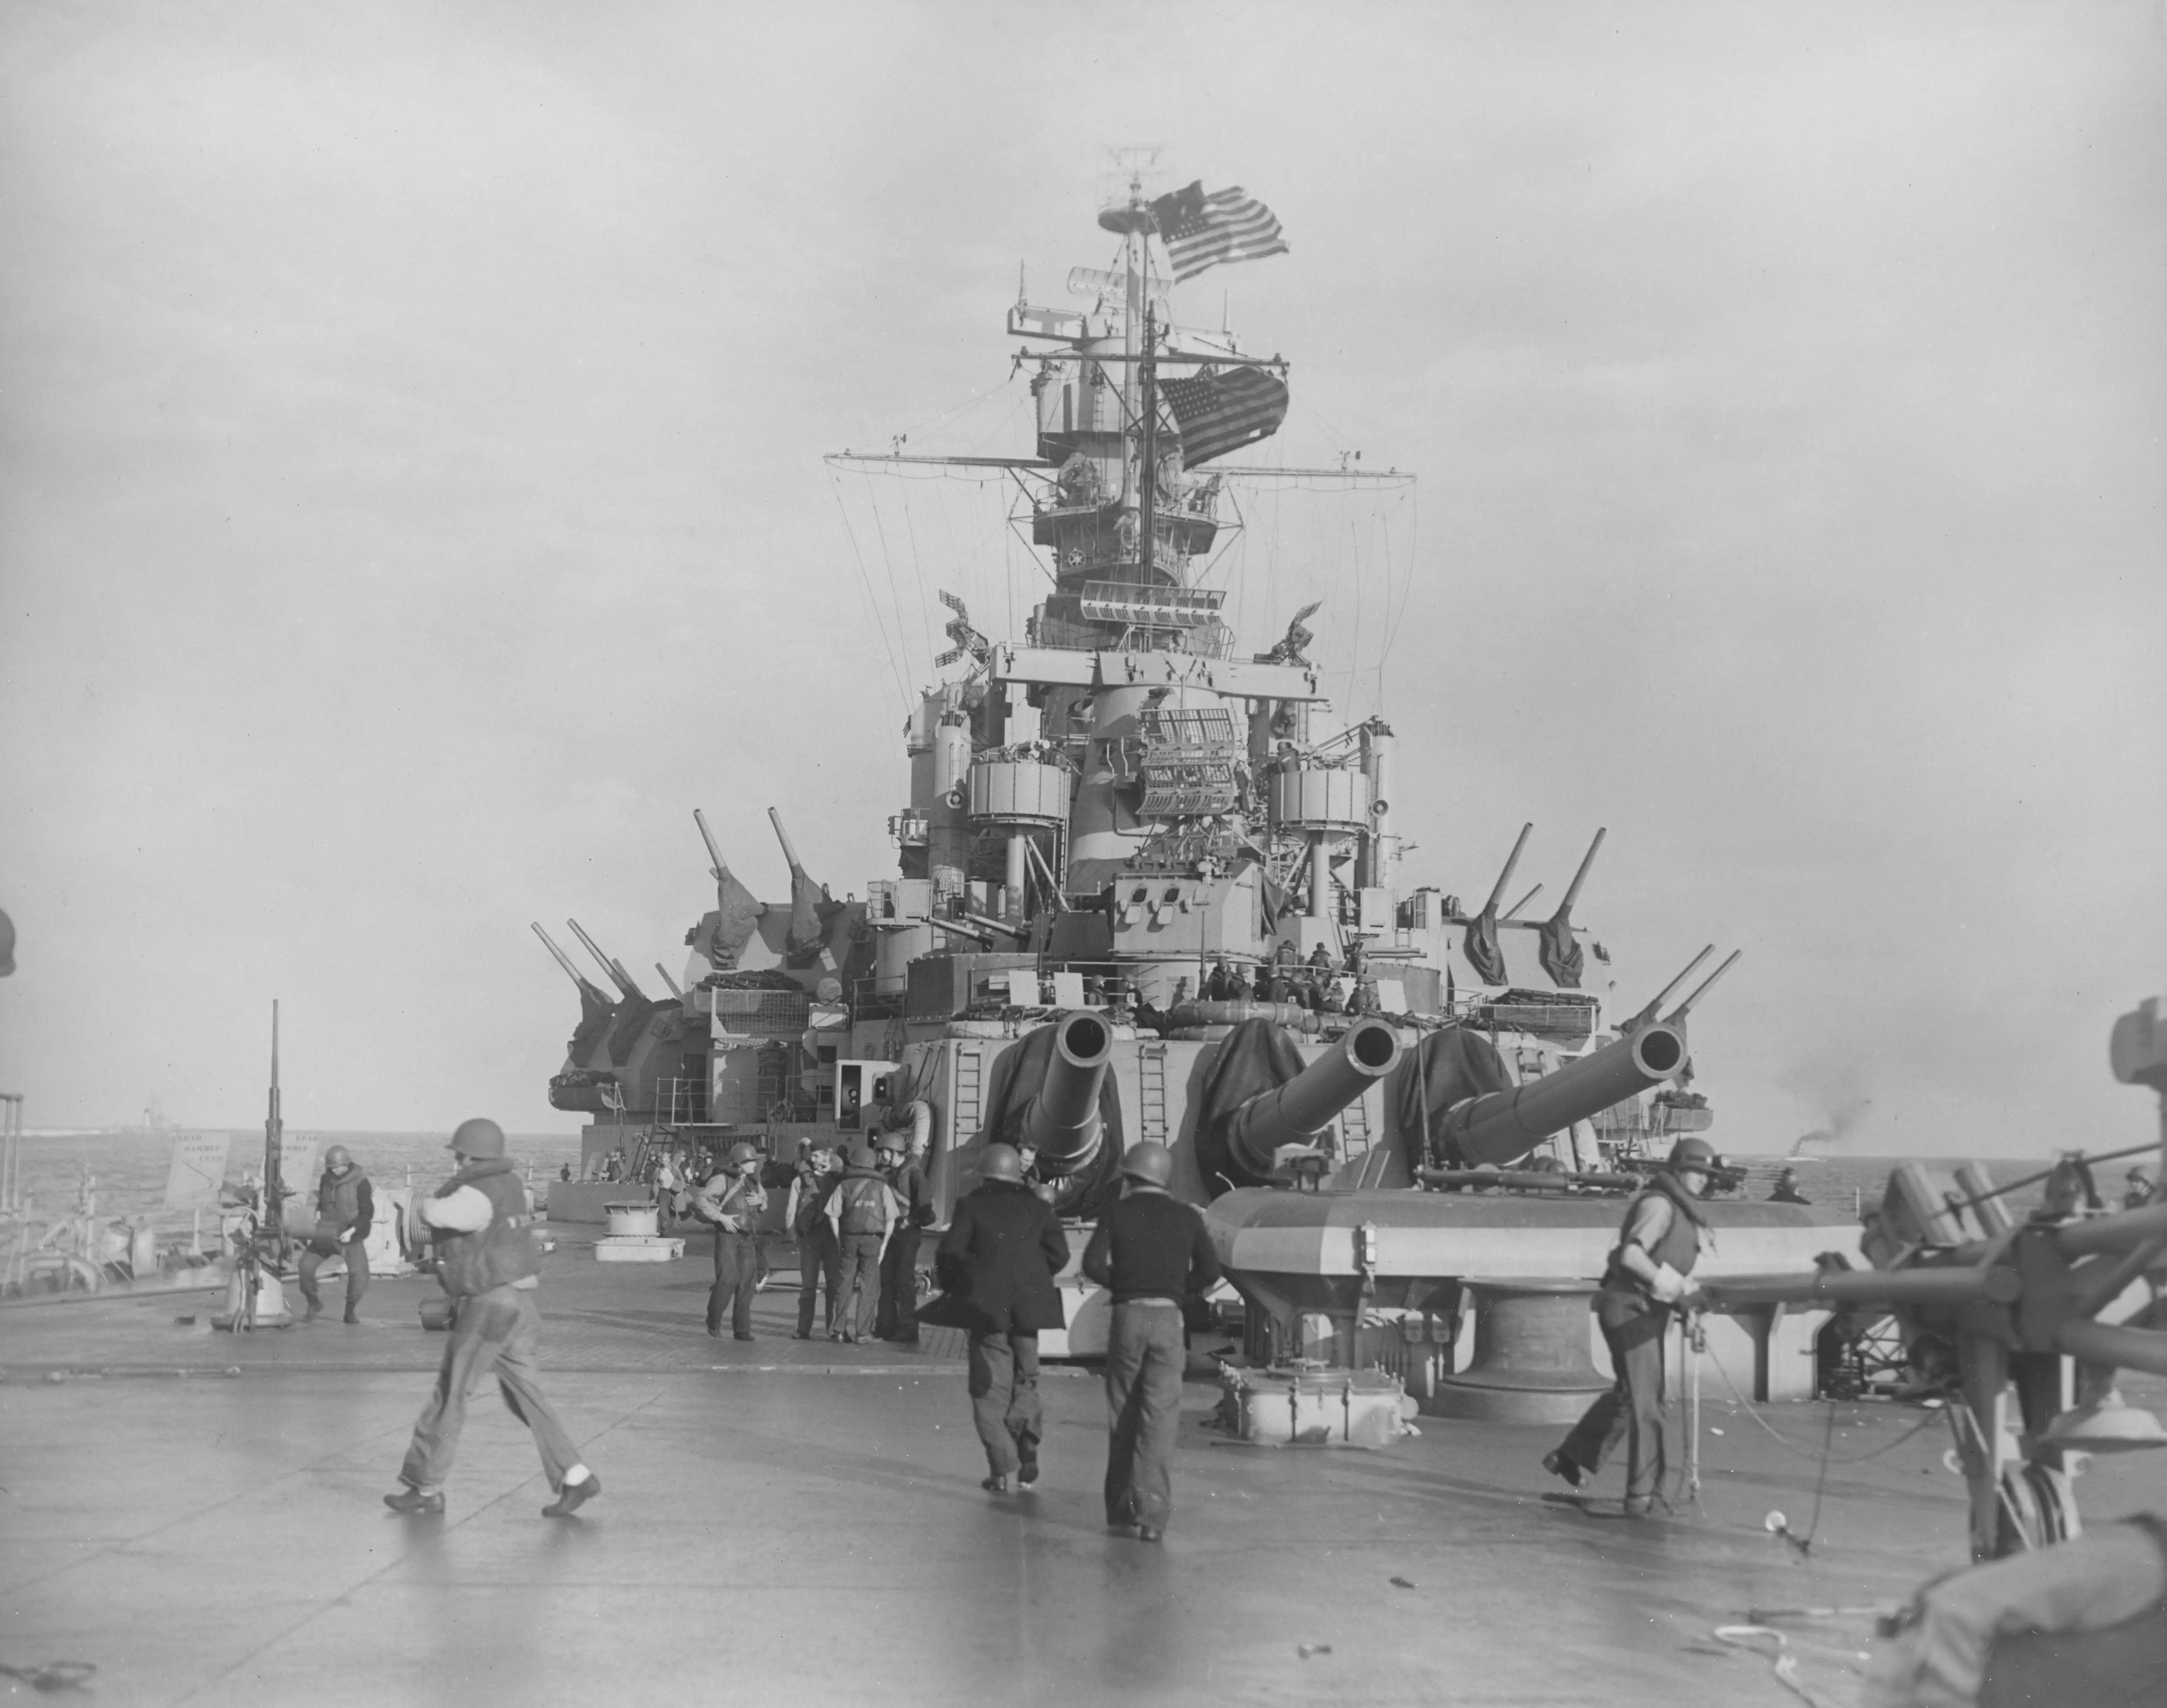 A black and white photograph taken from the stern of USS Massachusetts. Men in life jackets and helmets are moving around the deck, loading guns, and preparing for battle.